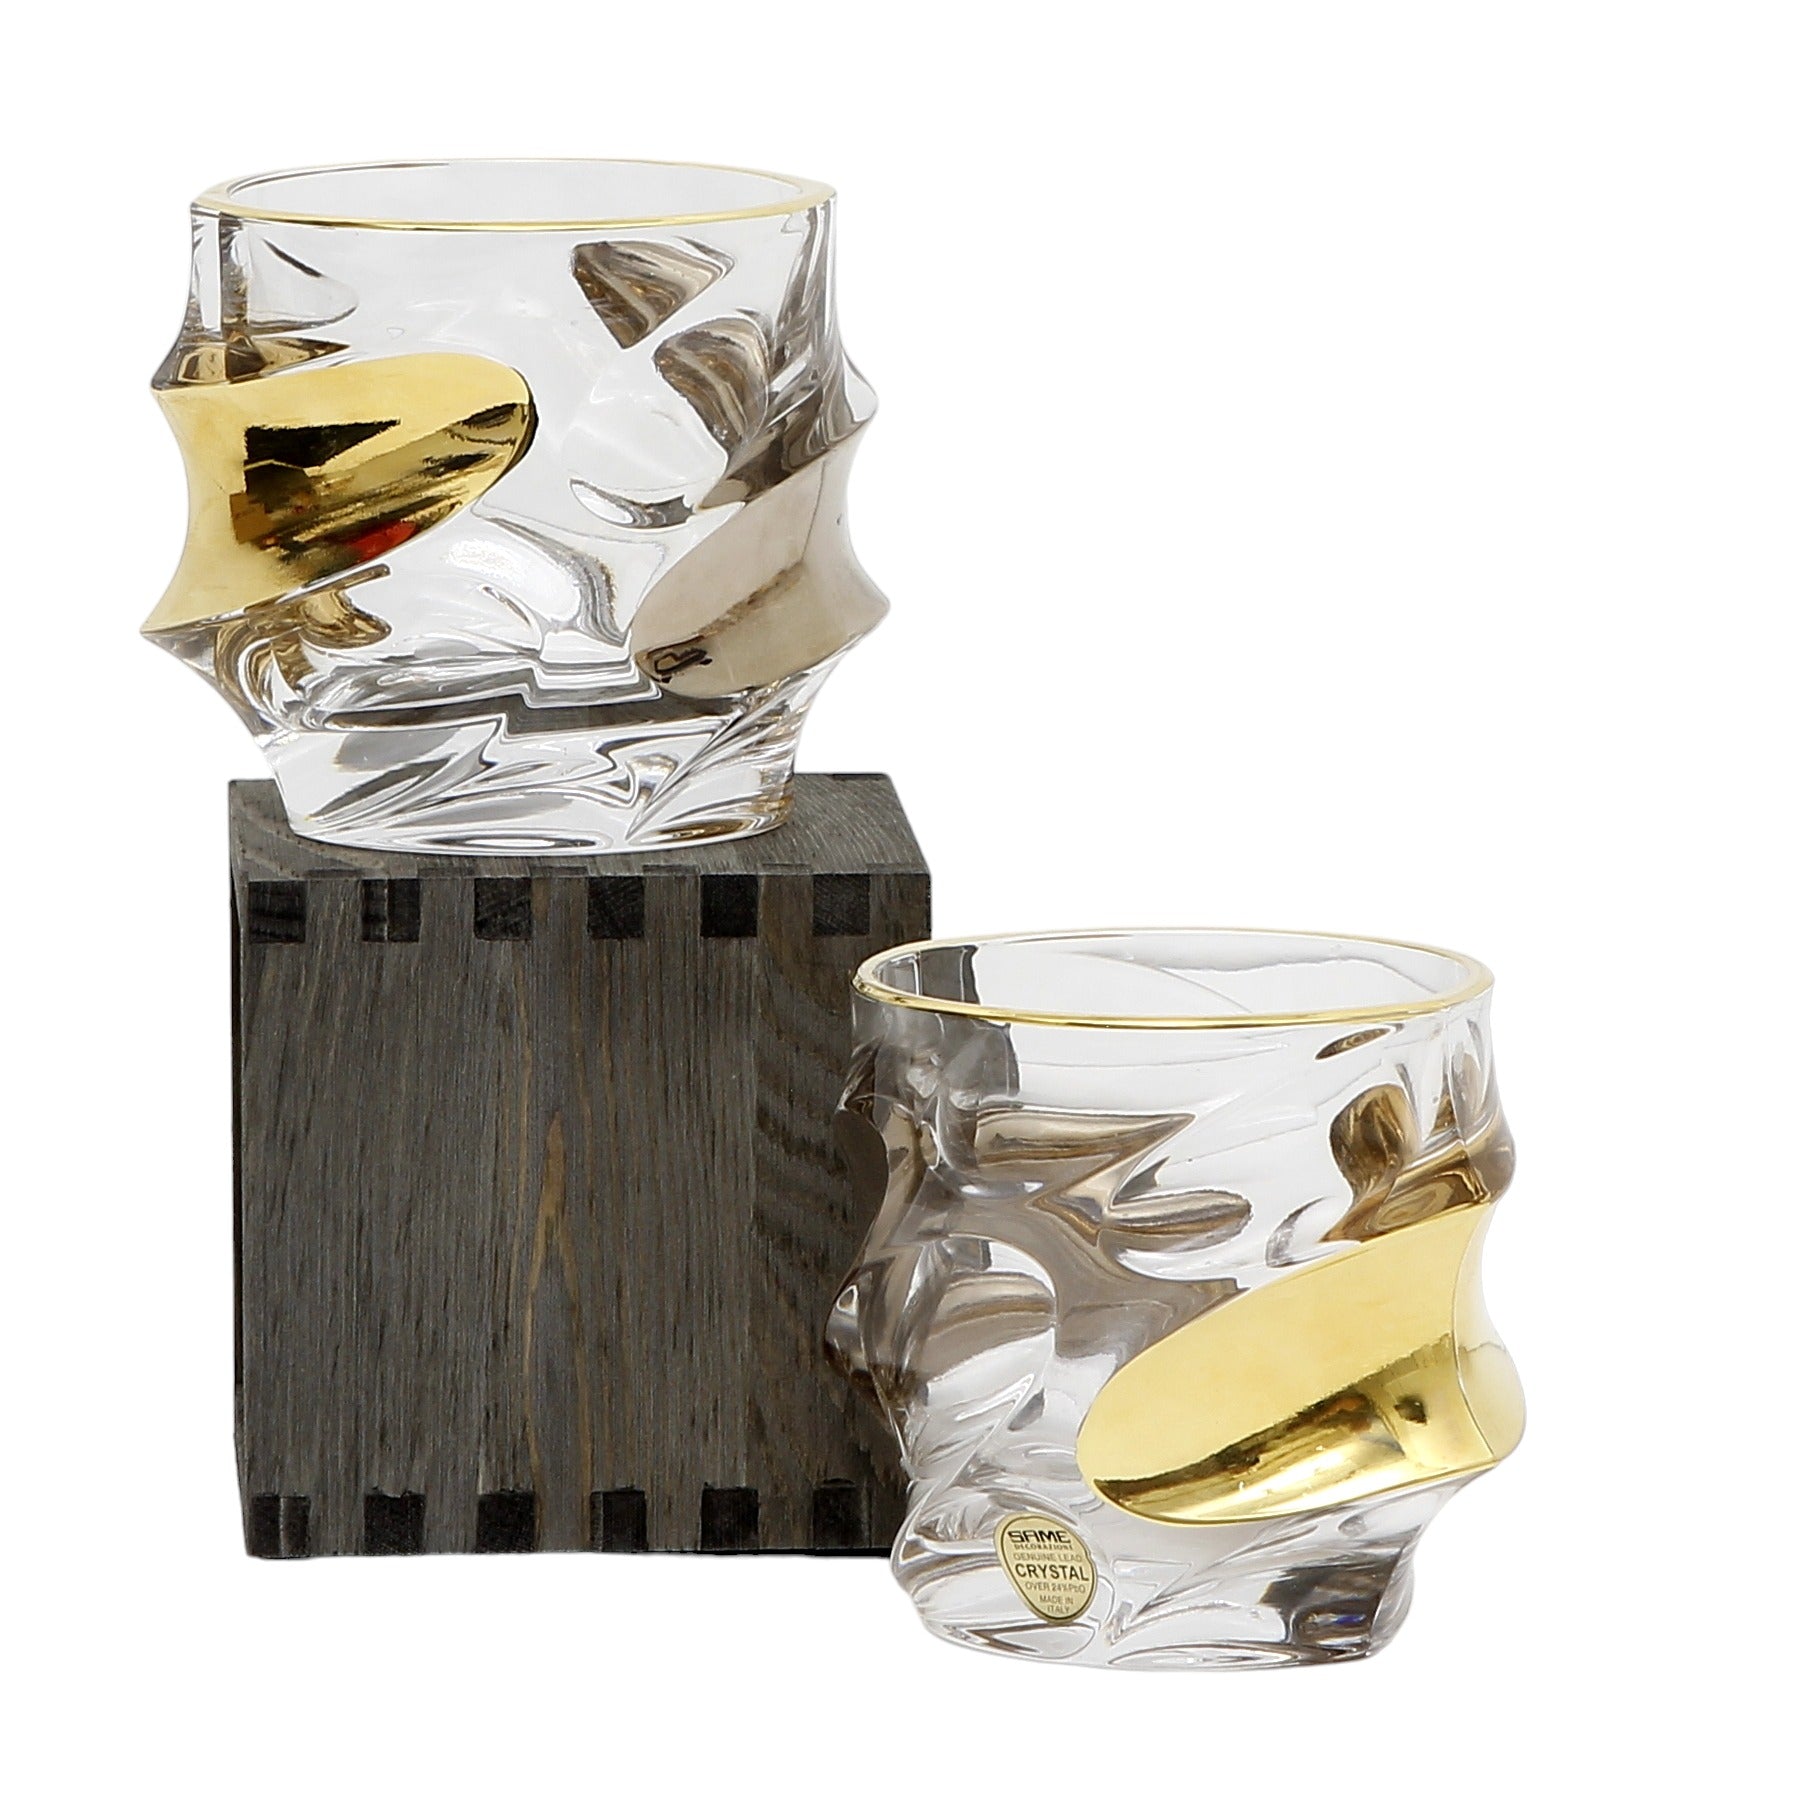 CRYSTAL GLASS: Exquisite Italian Crystal Glass for Whiskey/Old Fashion featuring a 24 Carat Gold Rim and Gold/Platinum Accents.